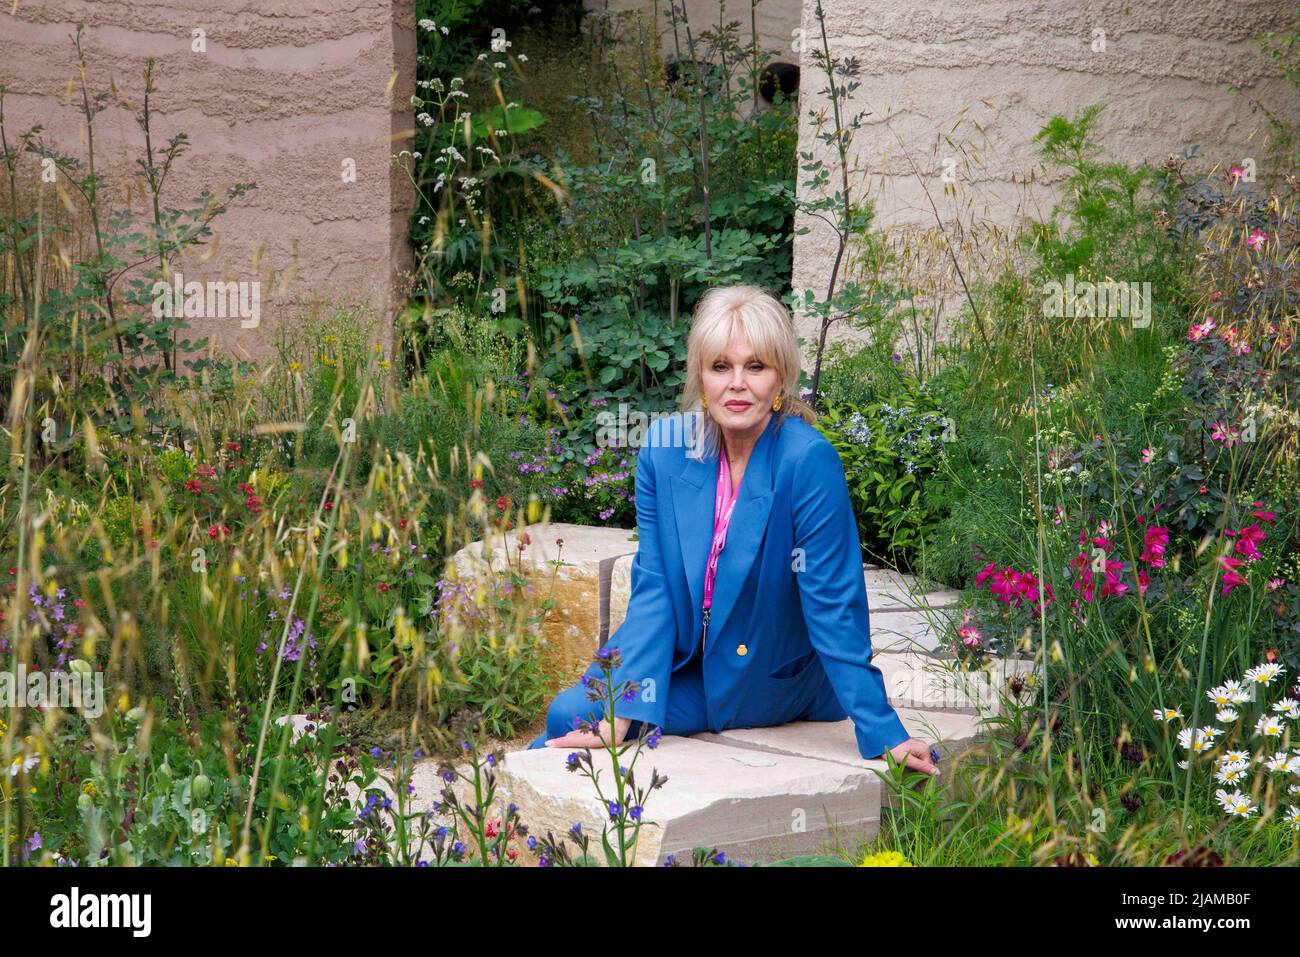 Dame Joanna Lumley, actress model and activist, at the RHS Chelsea Flower Show. She is a National Treasure. Stock Photo